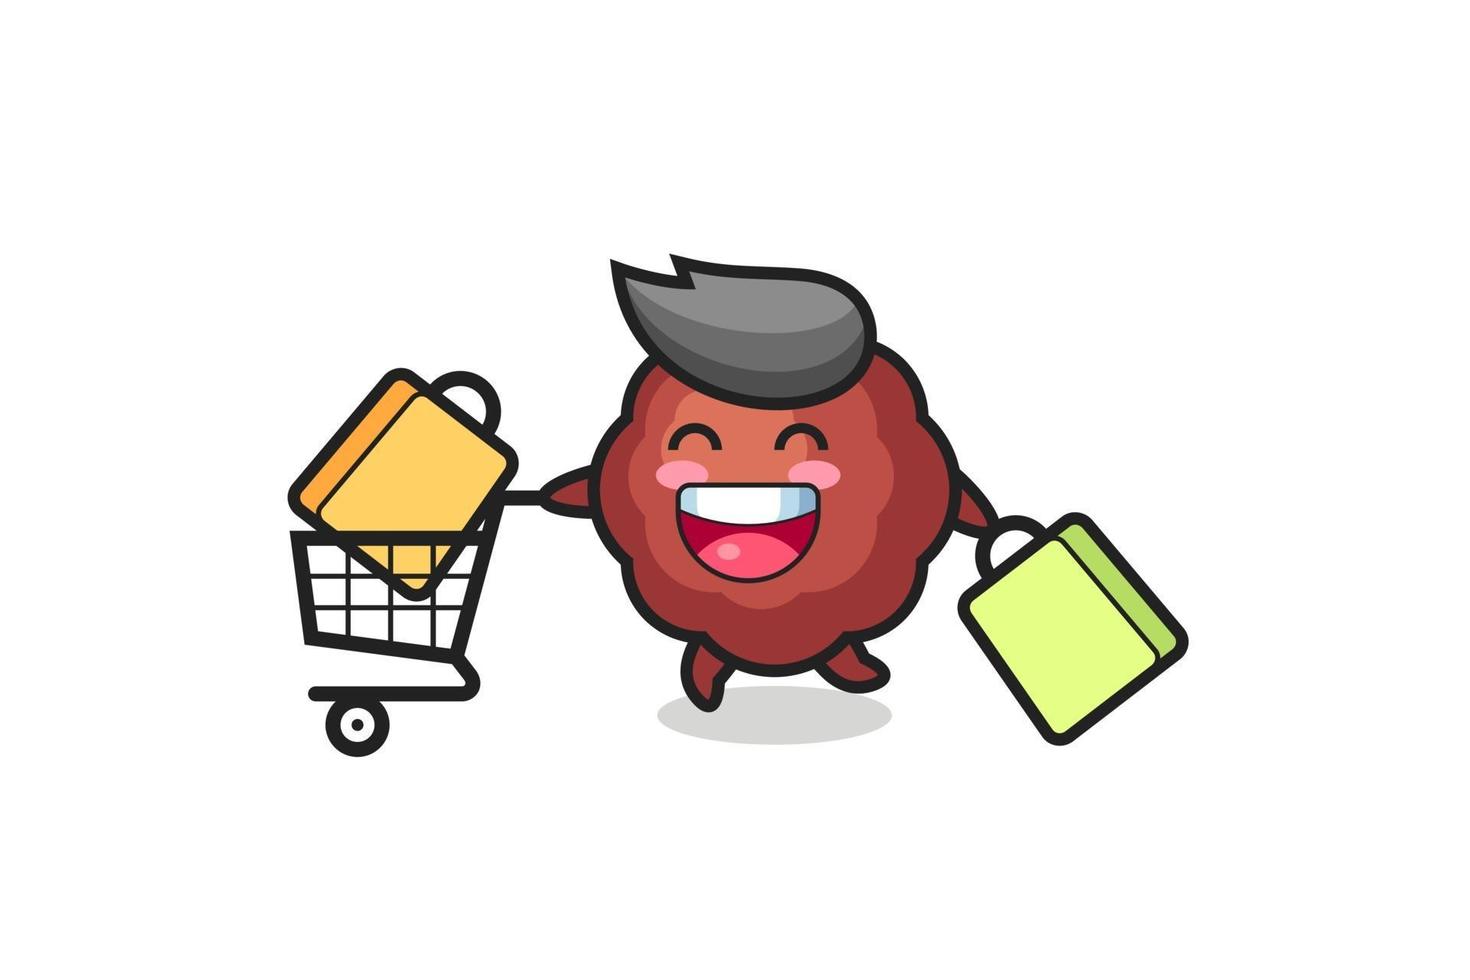 black Friday illustration with cute meatball mascot vector